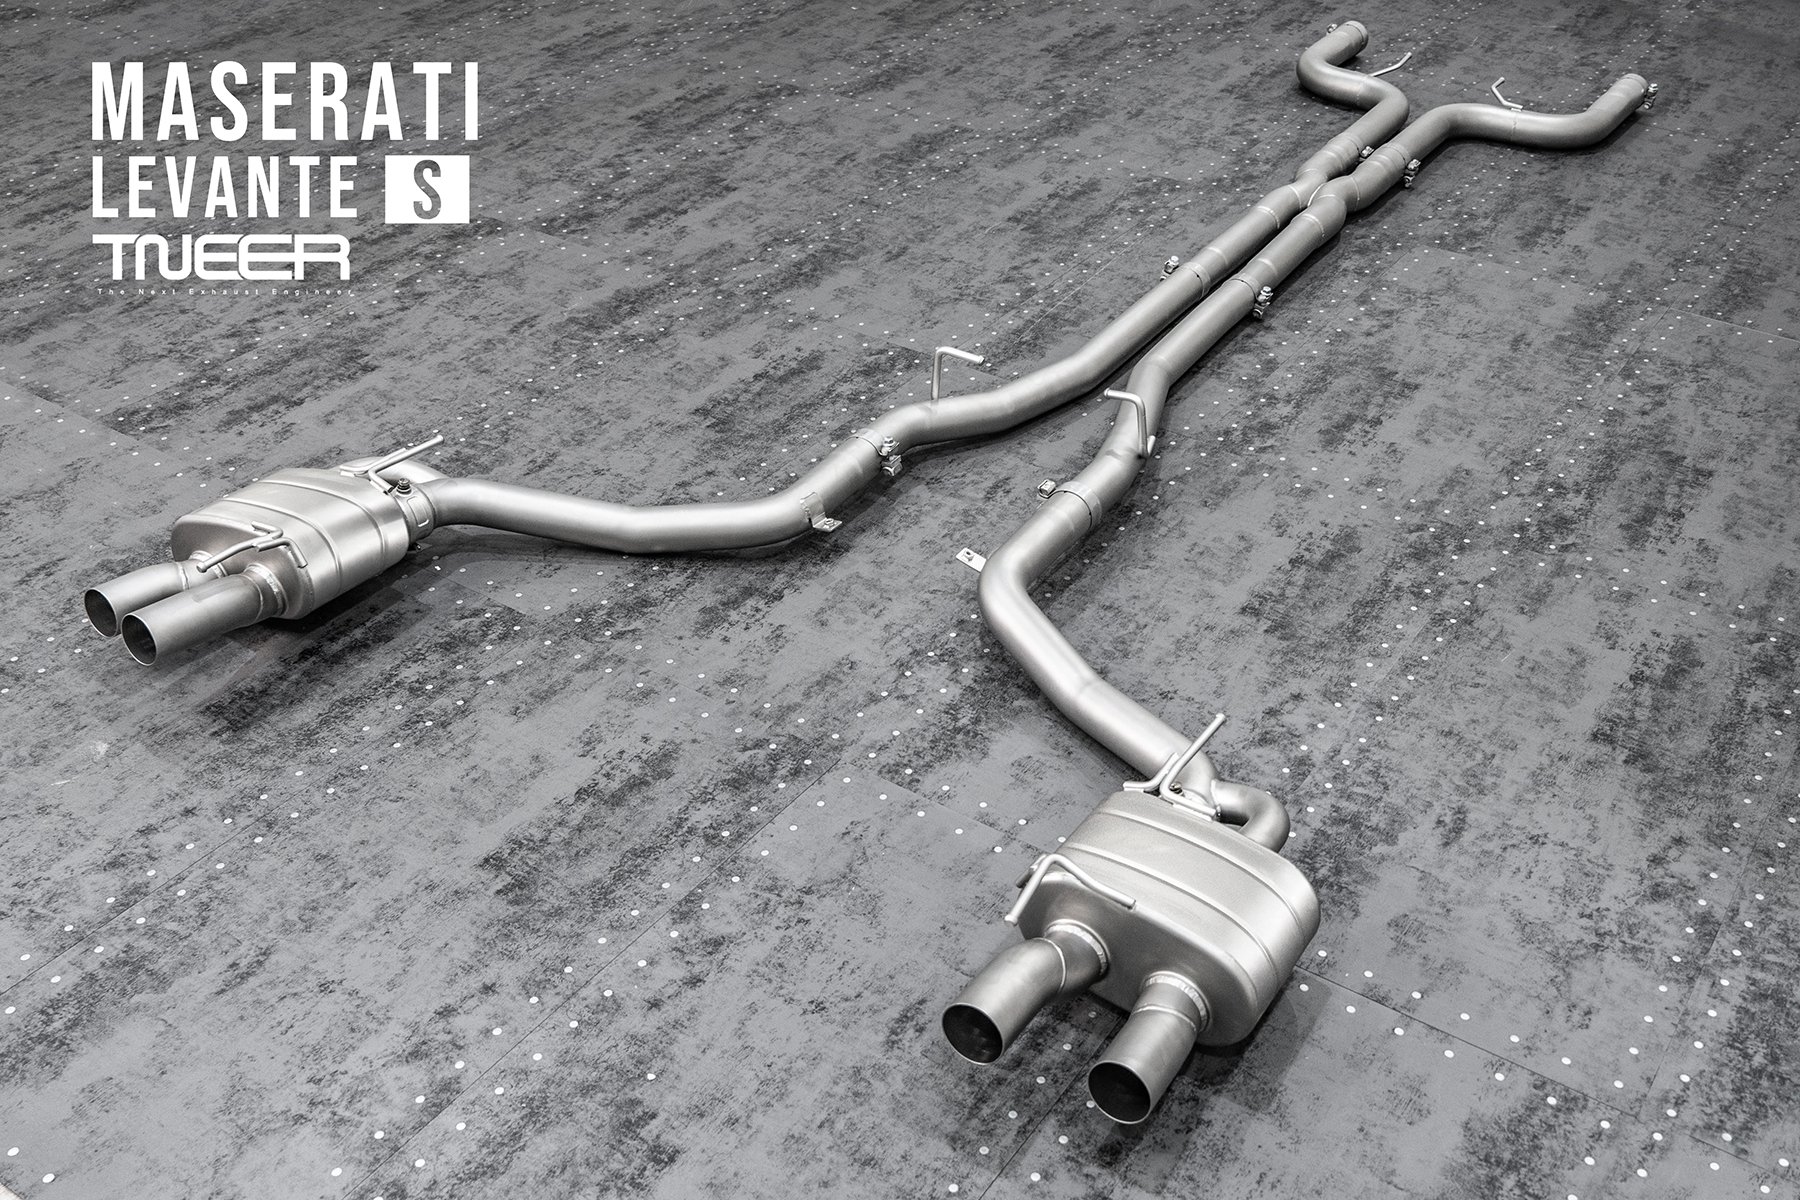 Audi RS4 (B8) 4.2 FSI TNEER Exhaust System with TACS